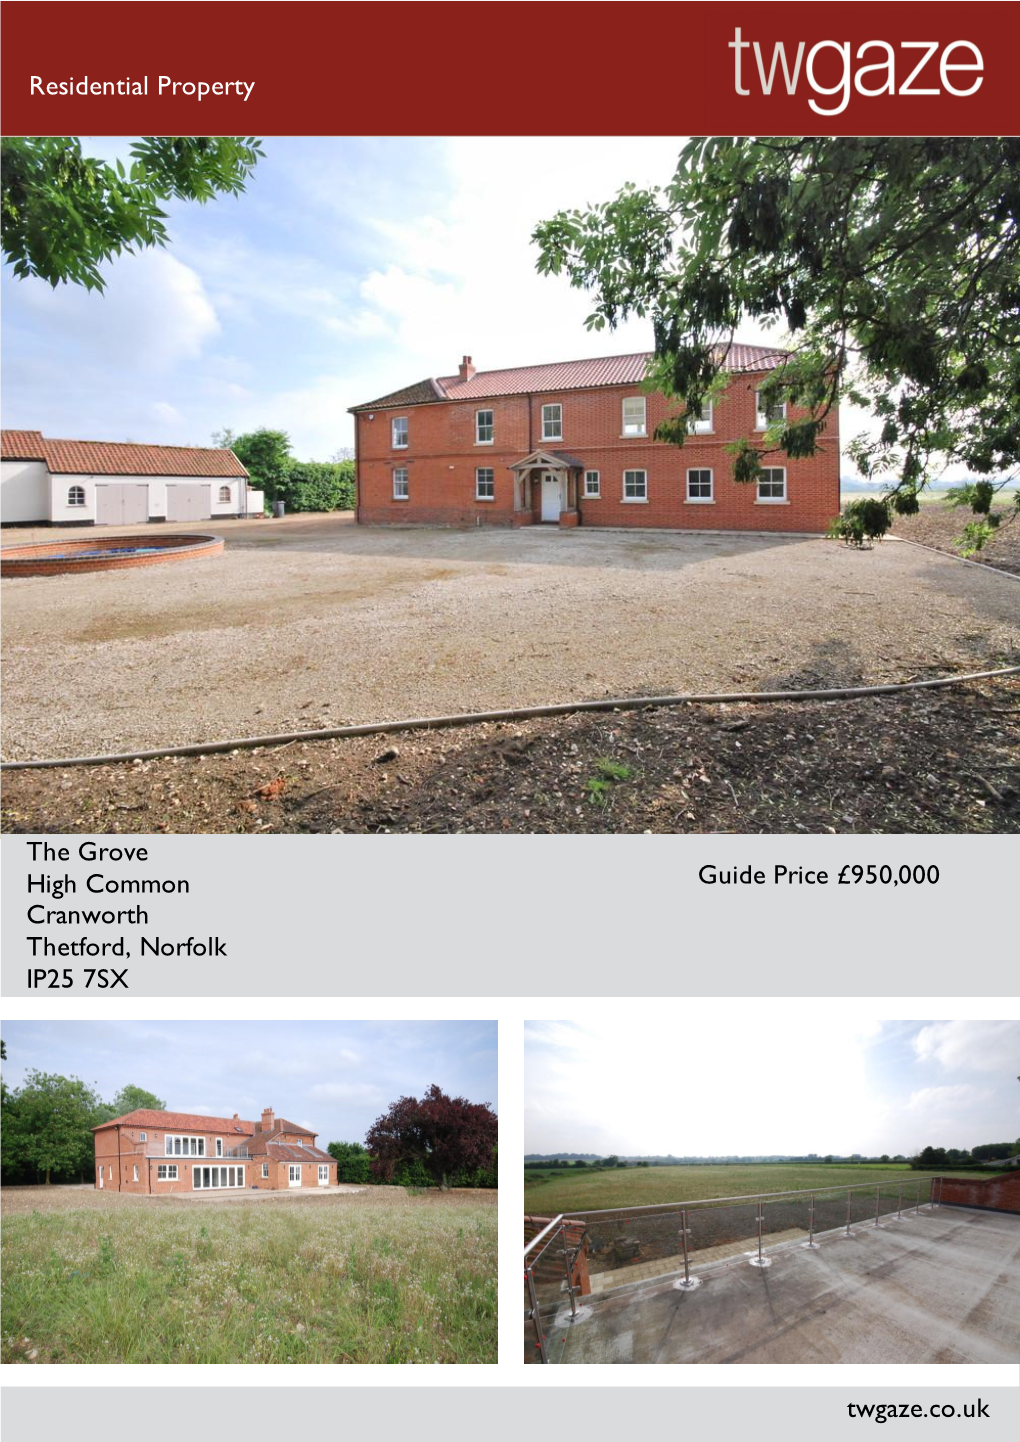 Residential Property the Grove High Common Cranworth Thetford